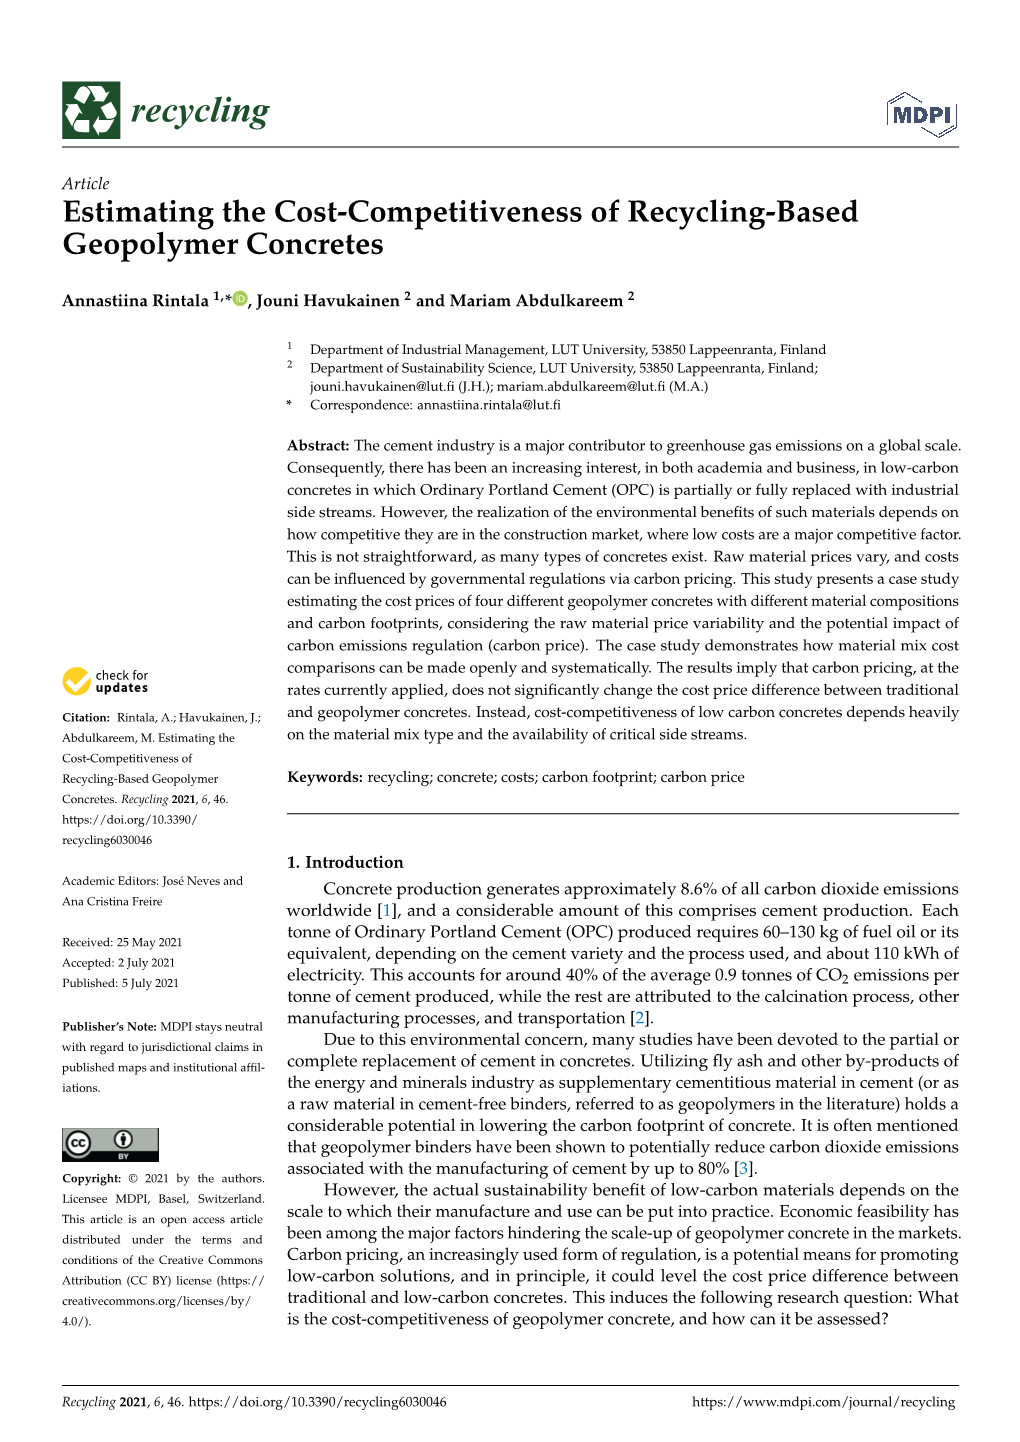 Estimating the Cost-Competitiveness of Recycling-Based Geopolymer Concretes